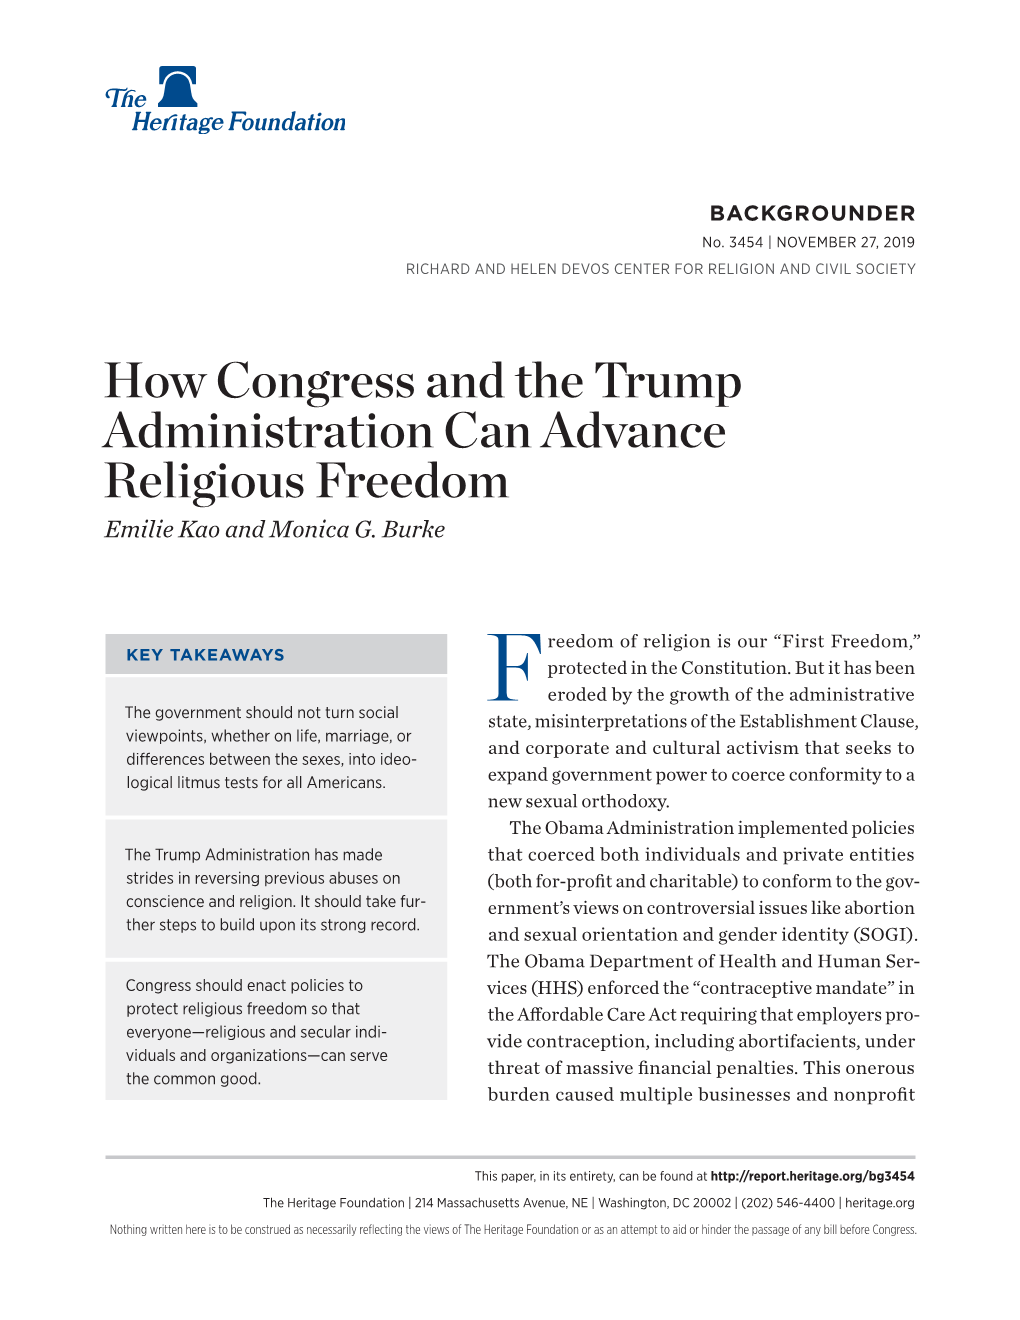 How Congress and the Trump Administration Can Advance Religious Freedom Emilie Kao and Monica G